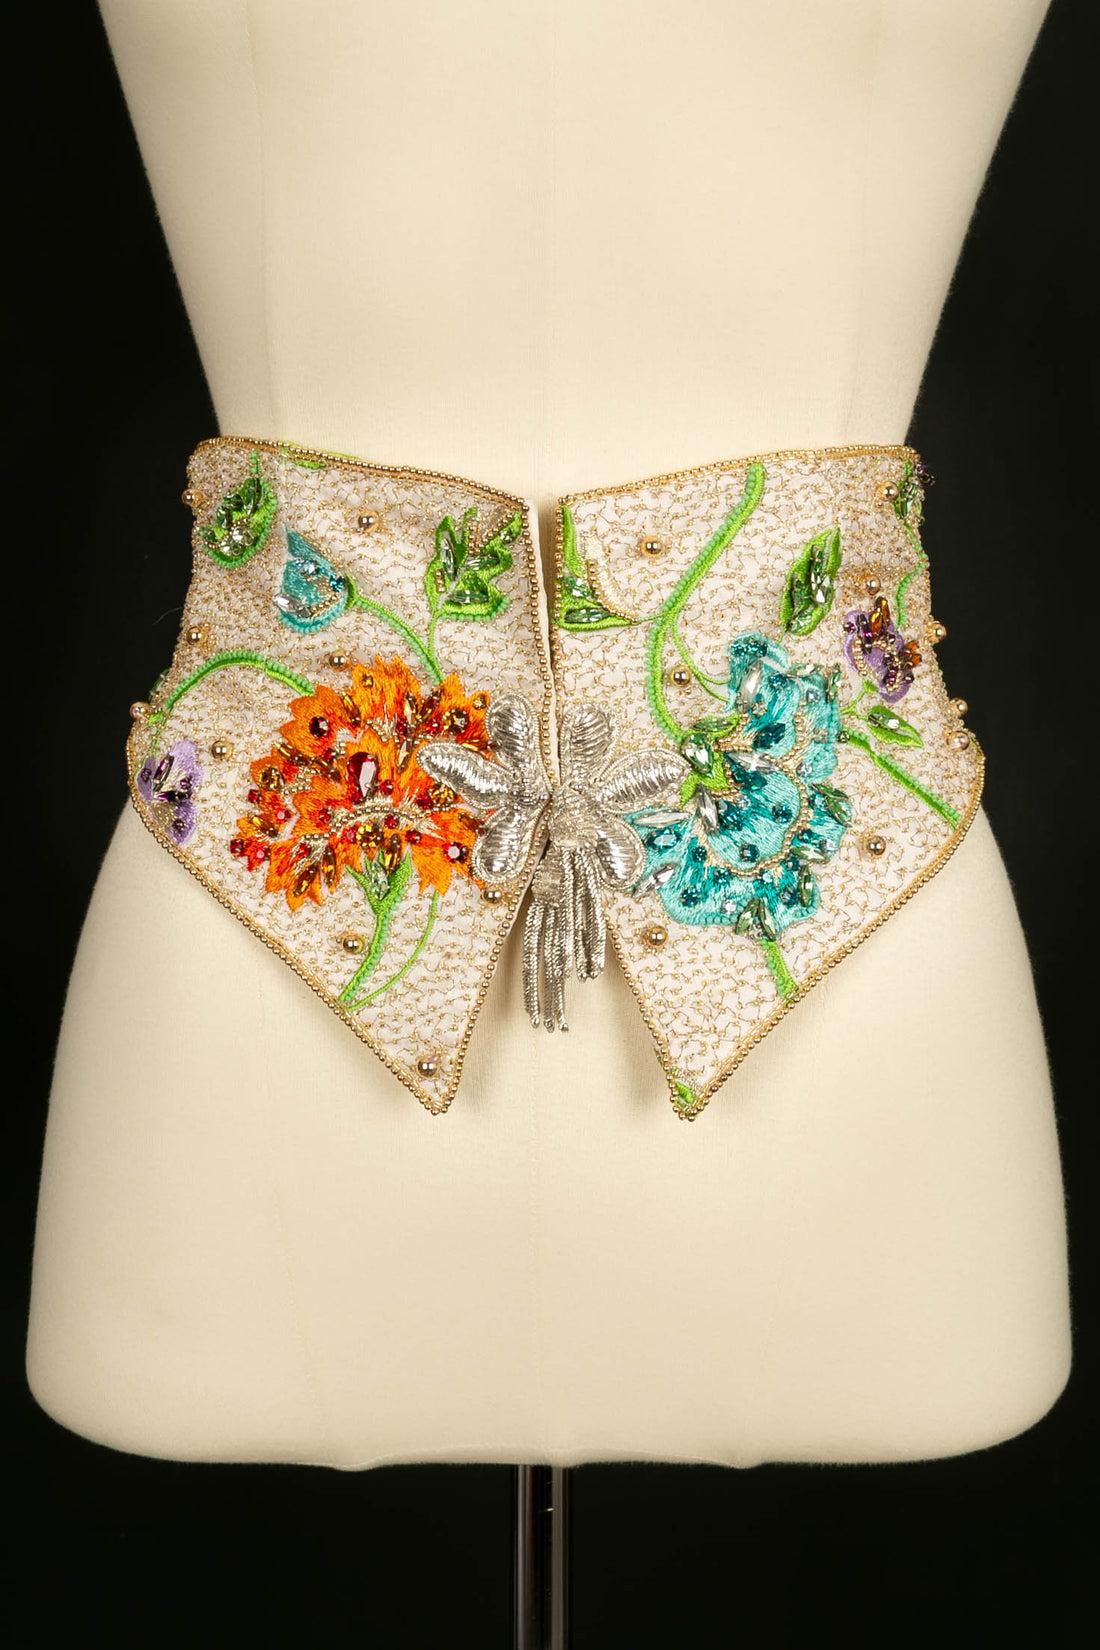 Ungaro Haute Embroidered with Flowers, Beads and Rhinestones Couture Set For Sale 6